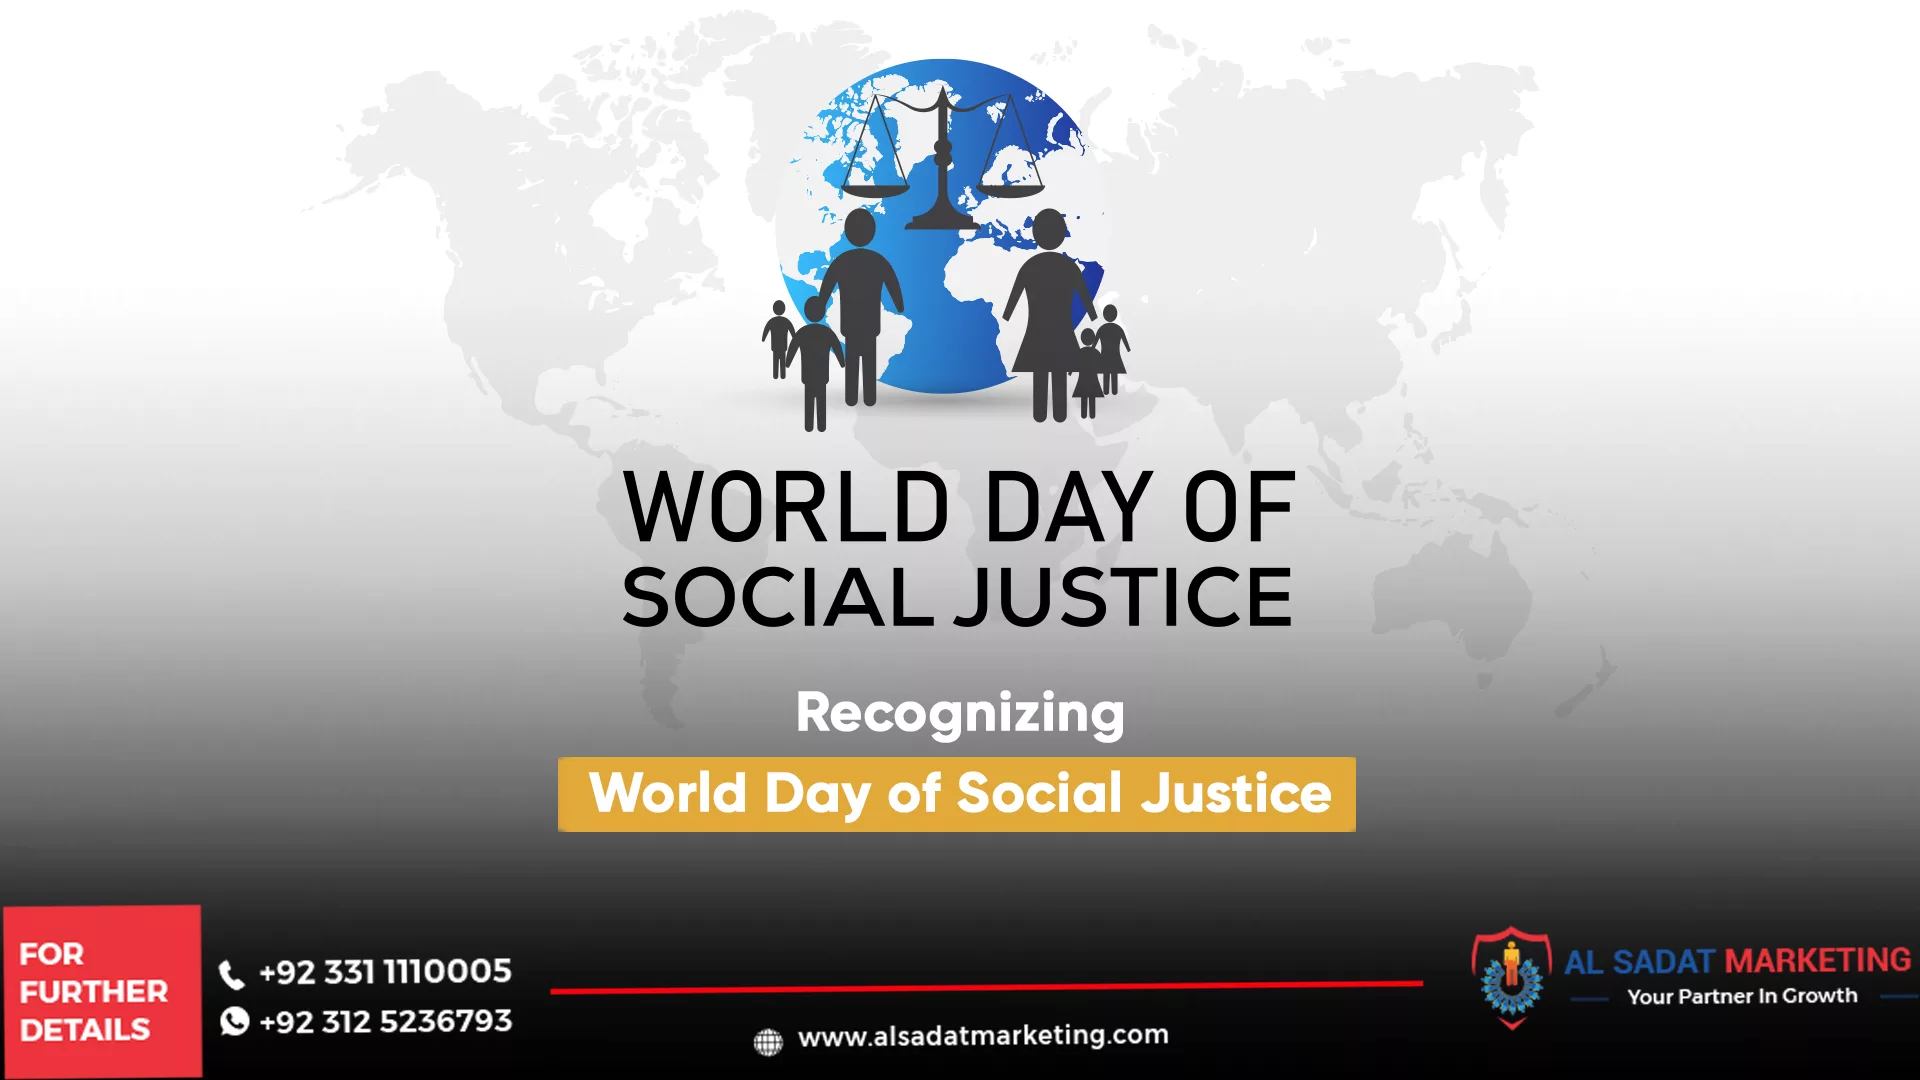 6 dummys and a scale on world day of social justice